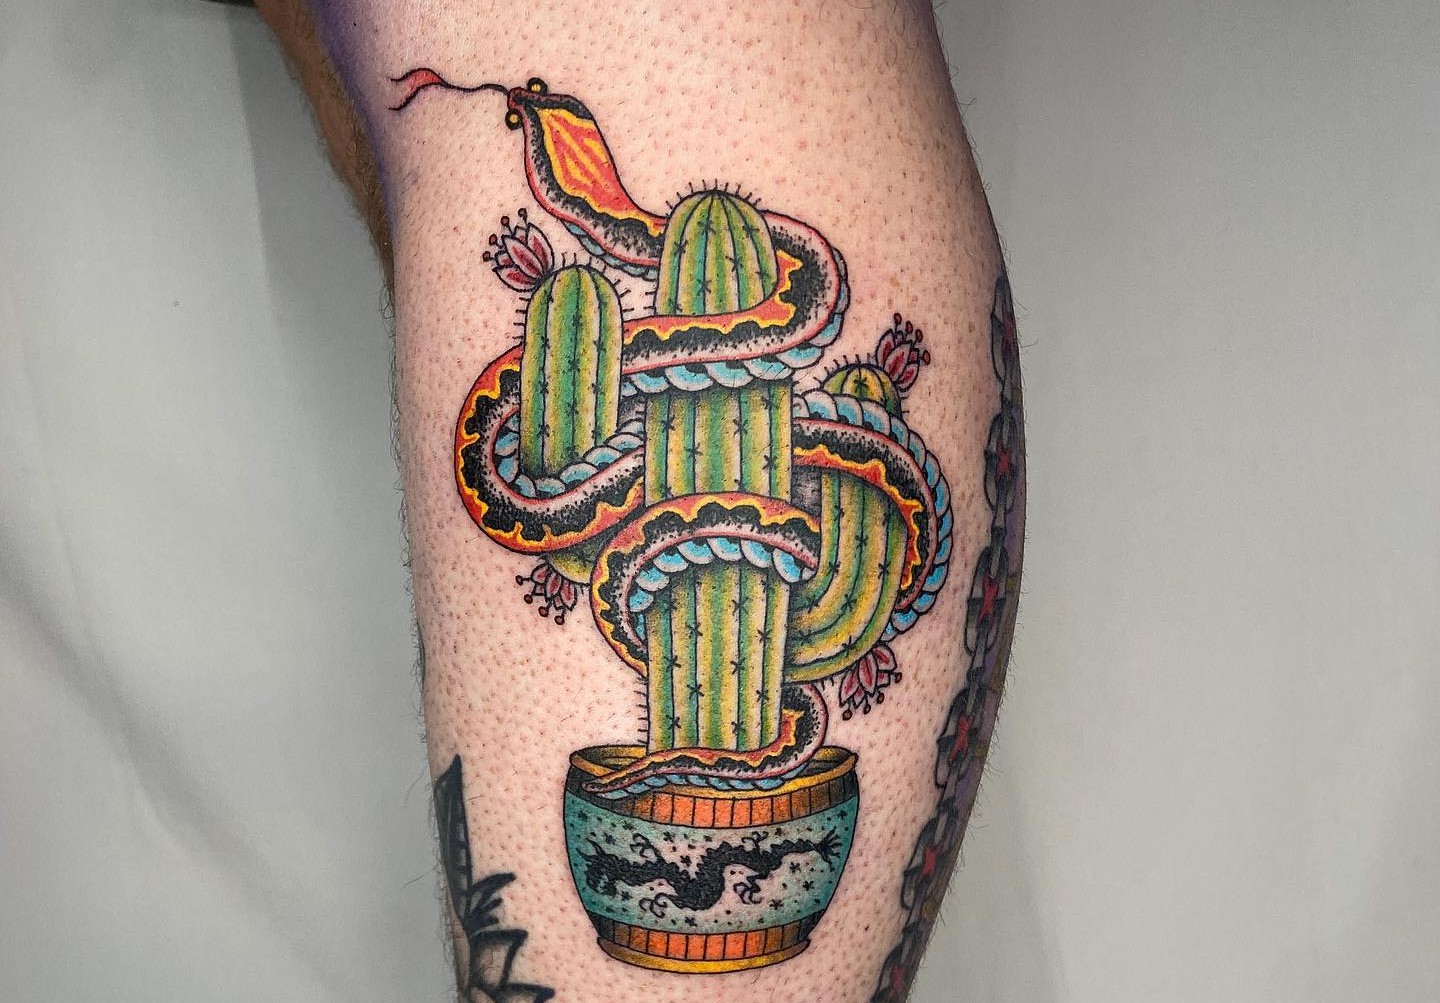 COOL CACTUS TATTOO DESIGNS + THEIR MEANINGS TO INSPIRE IN 2023